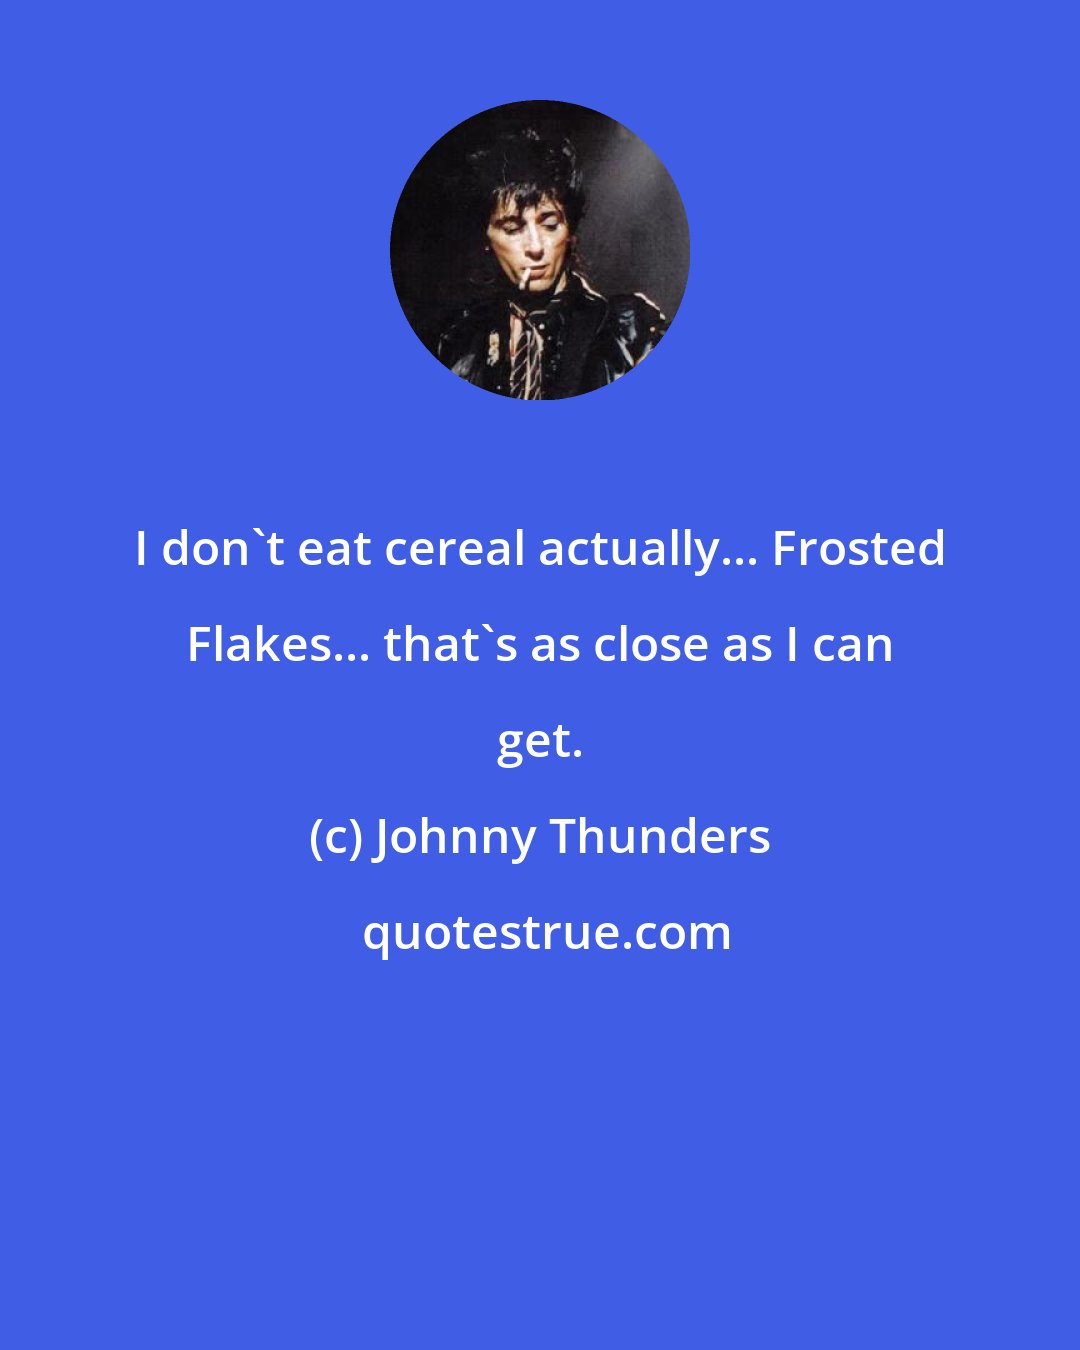 Johnny Thunders: I don't eat cereal actually... Frosted Flakes... that's as close as I can get.